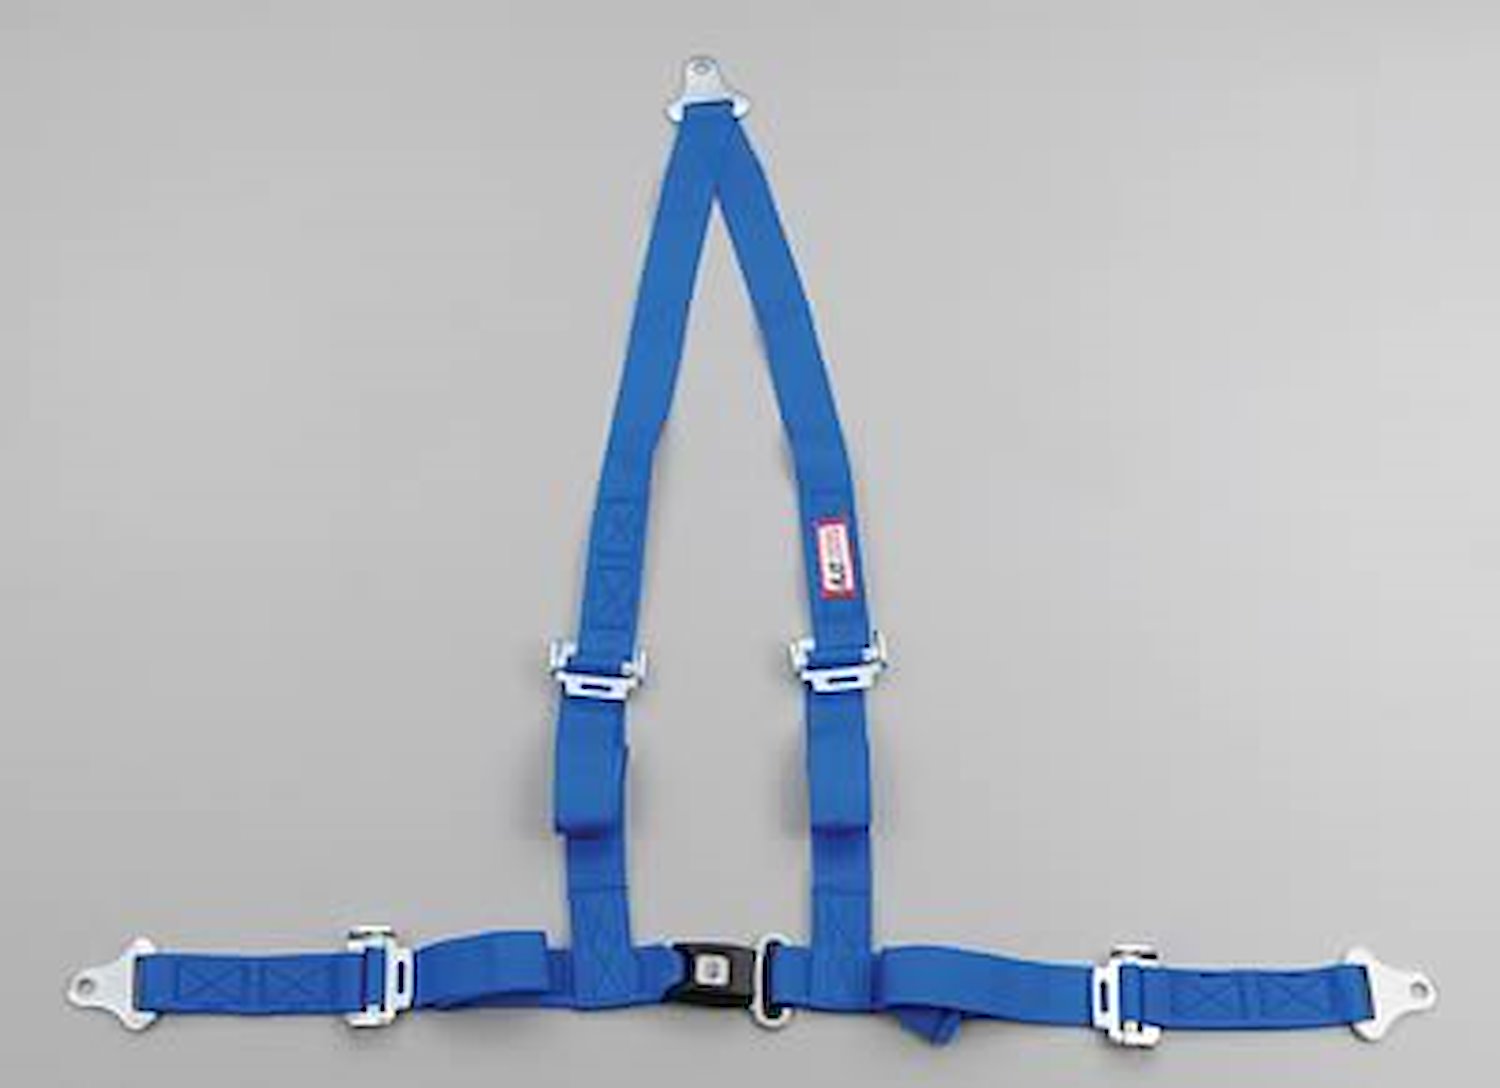 NON-SFI B&T HARNESS 2 PULL UP Lap Belt SNAP 2 S. H. Y FLOOR Mount WRAP/SNAP w/STERNUM STRAP BLUE